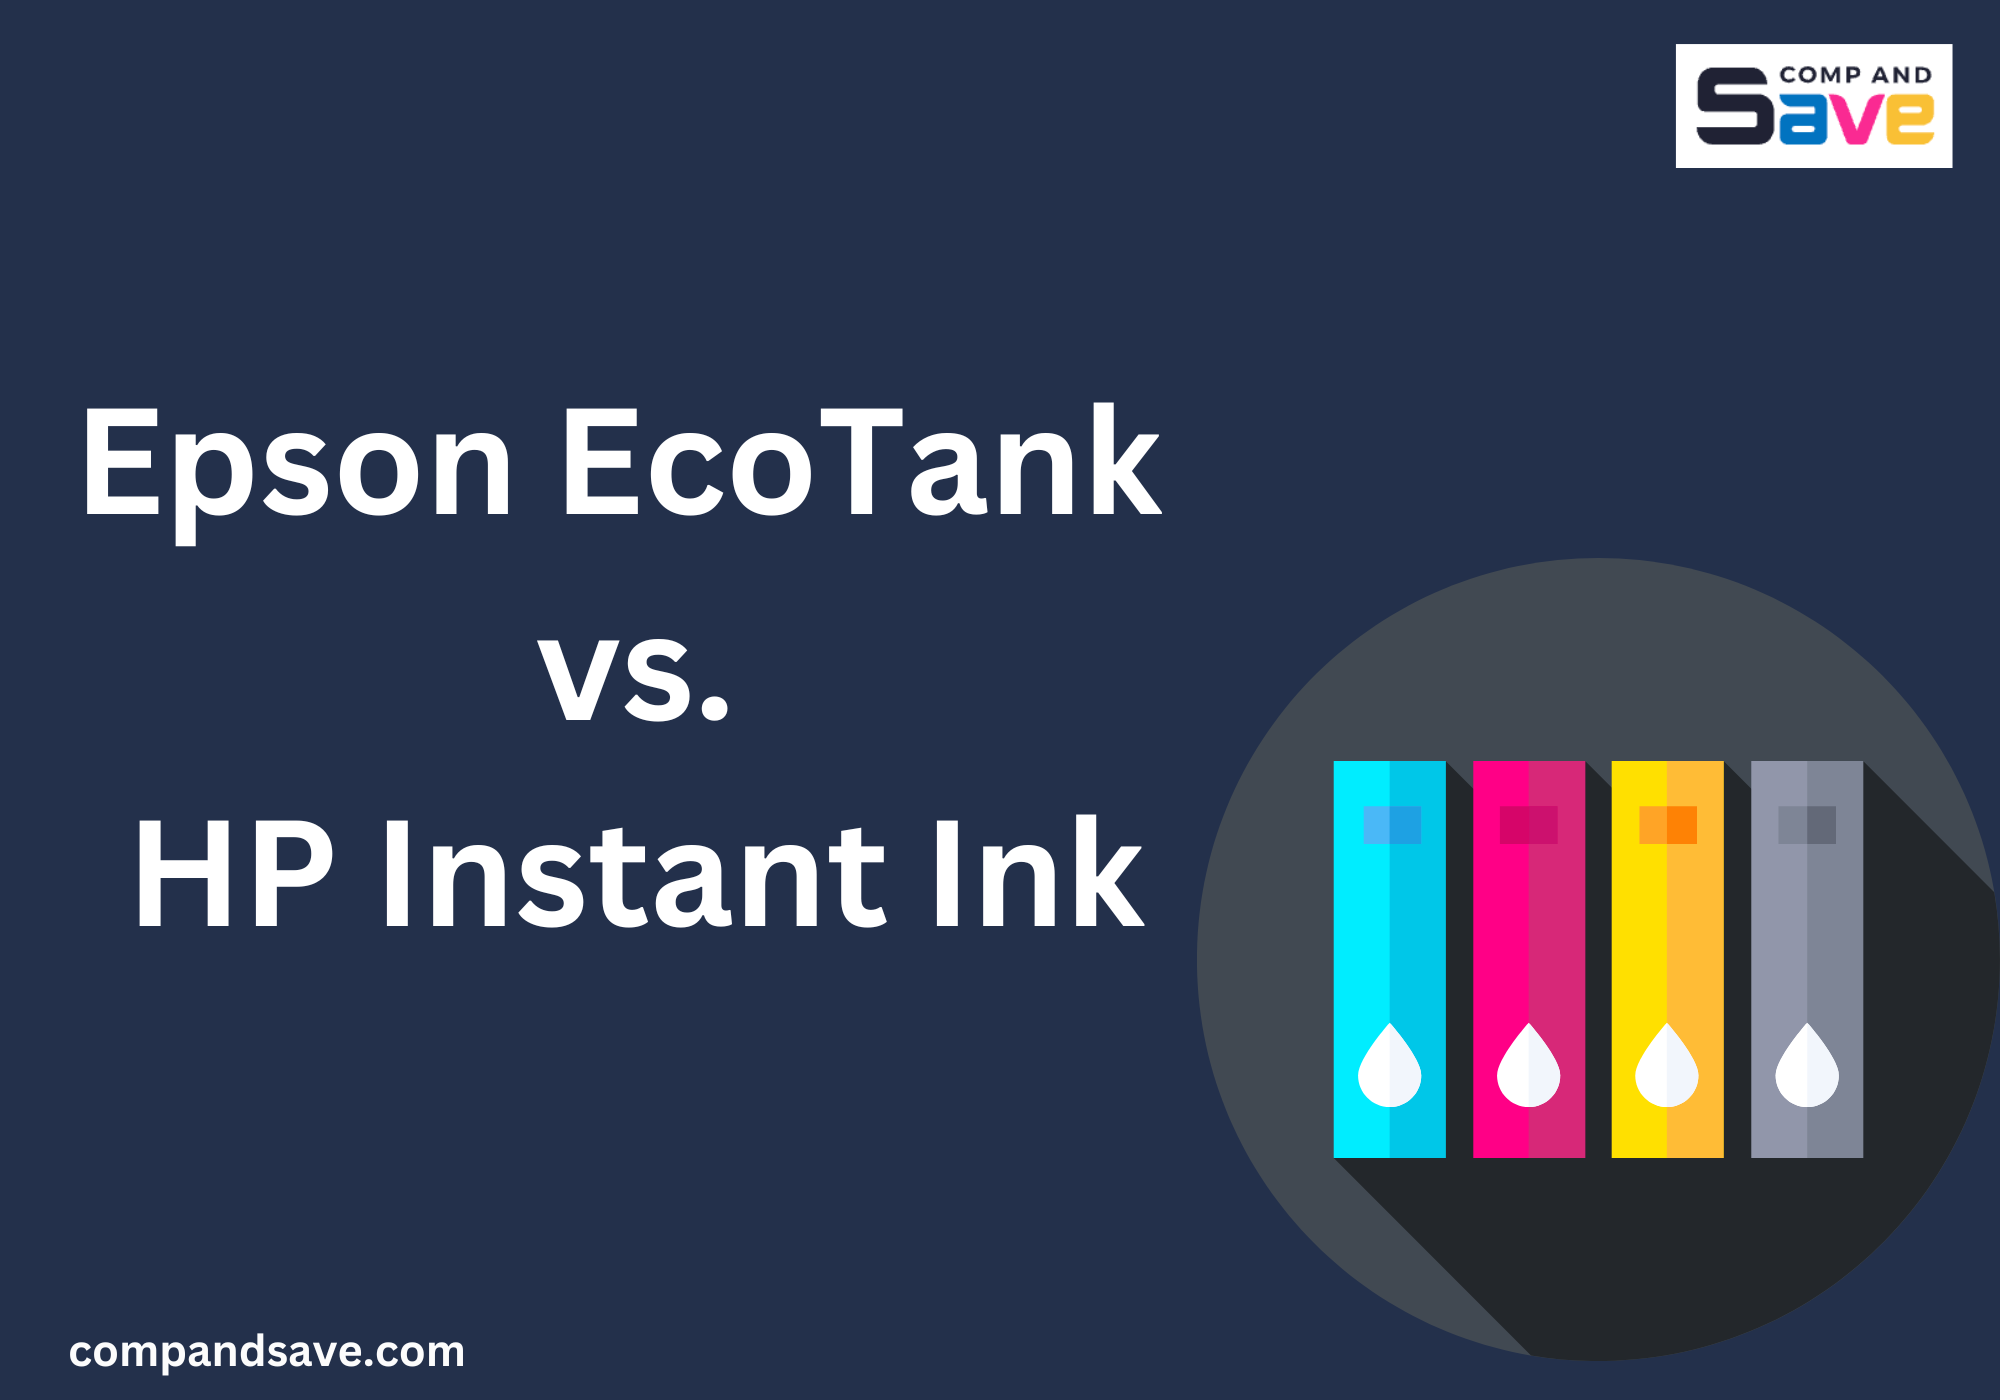 image from Epson EcoTank vs HP Instant Ink: Which One Should You Take?